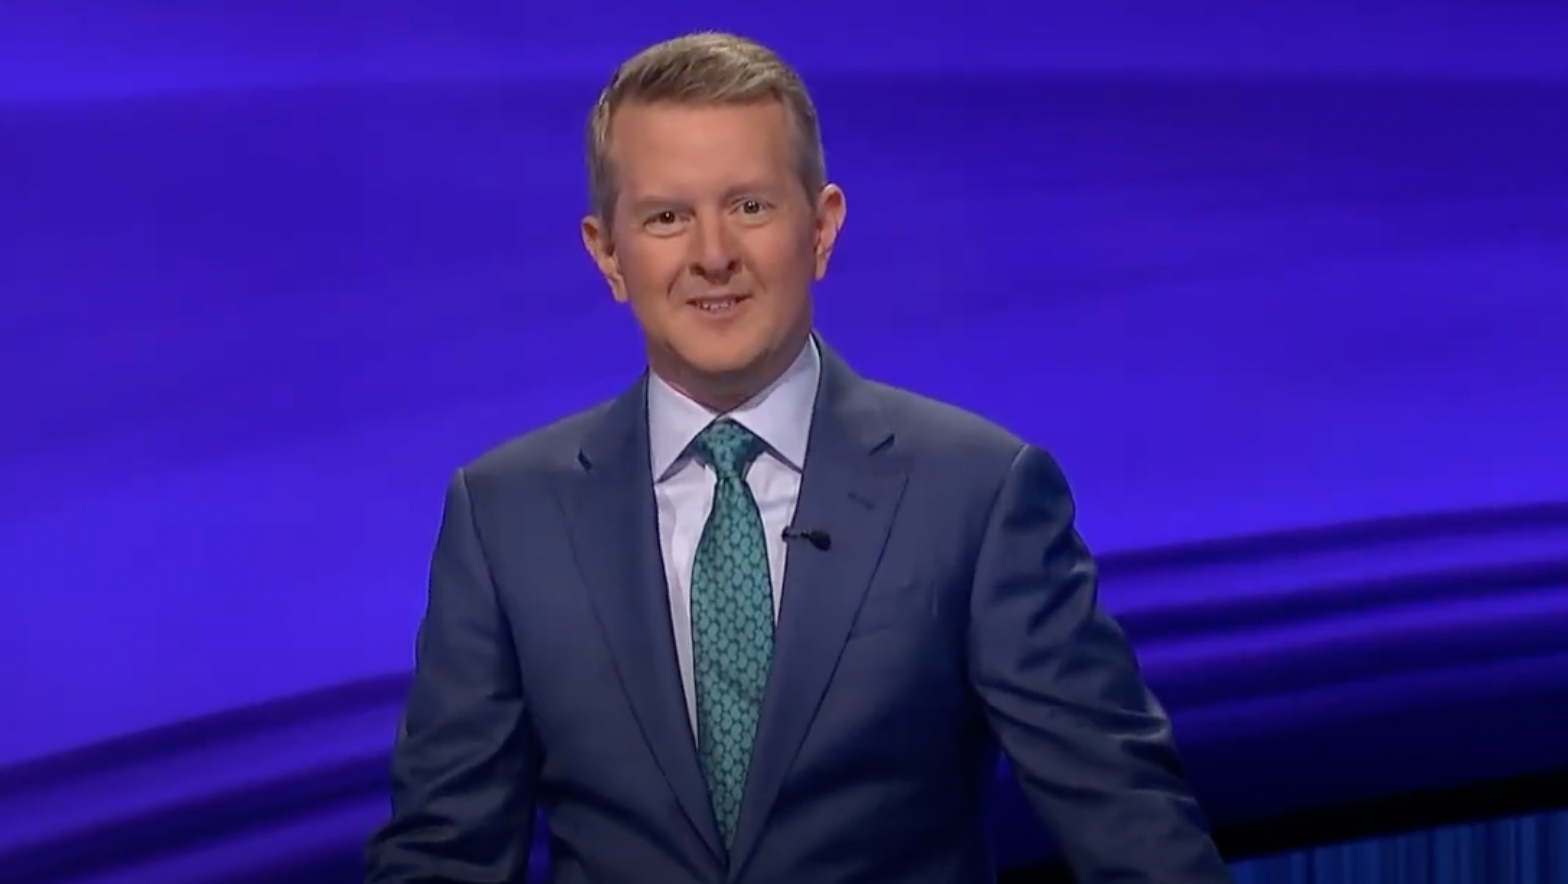 Ken Jennings is the sole Jeopardy! host after the departure of Mayim Bialik